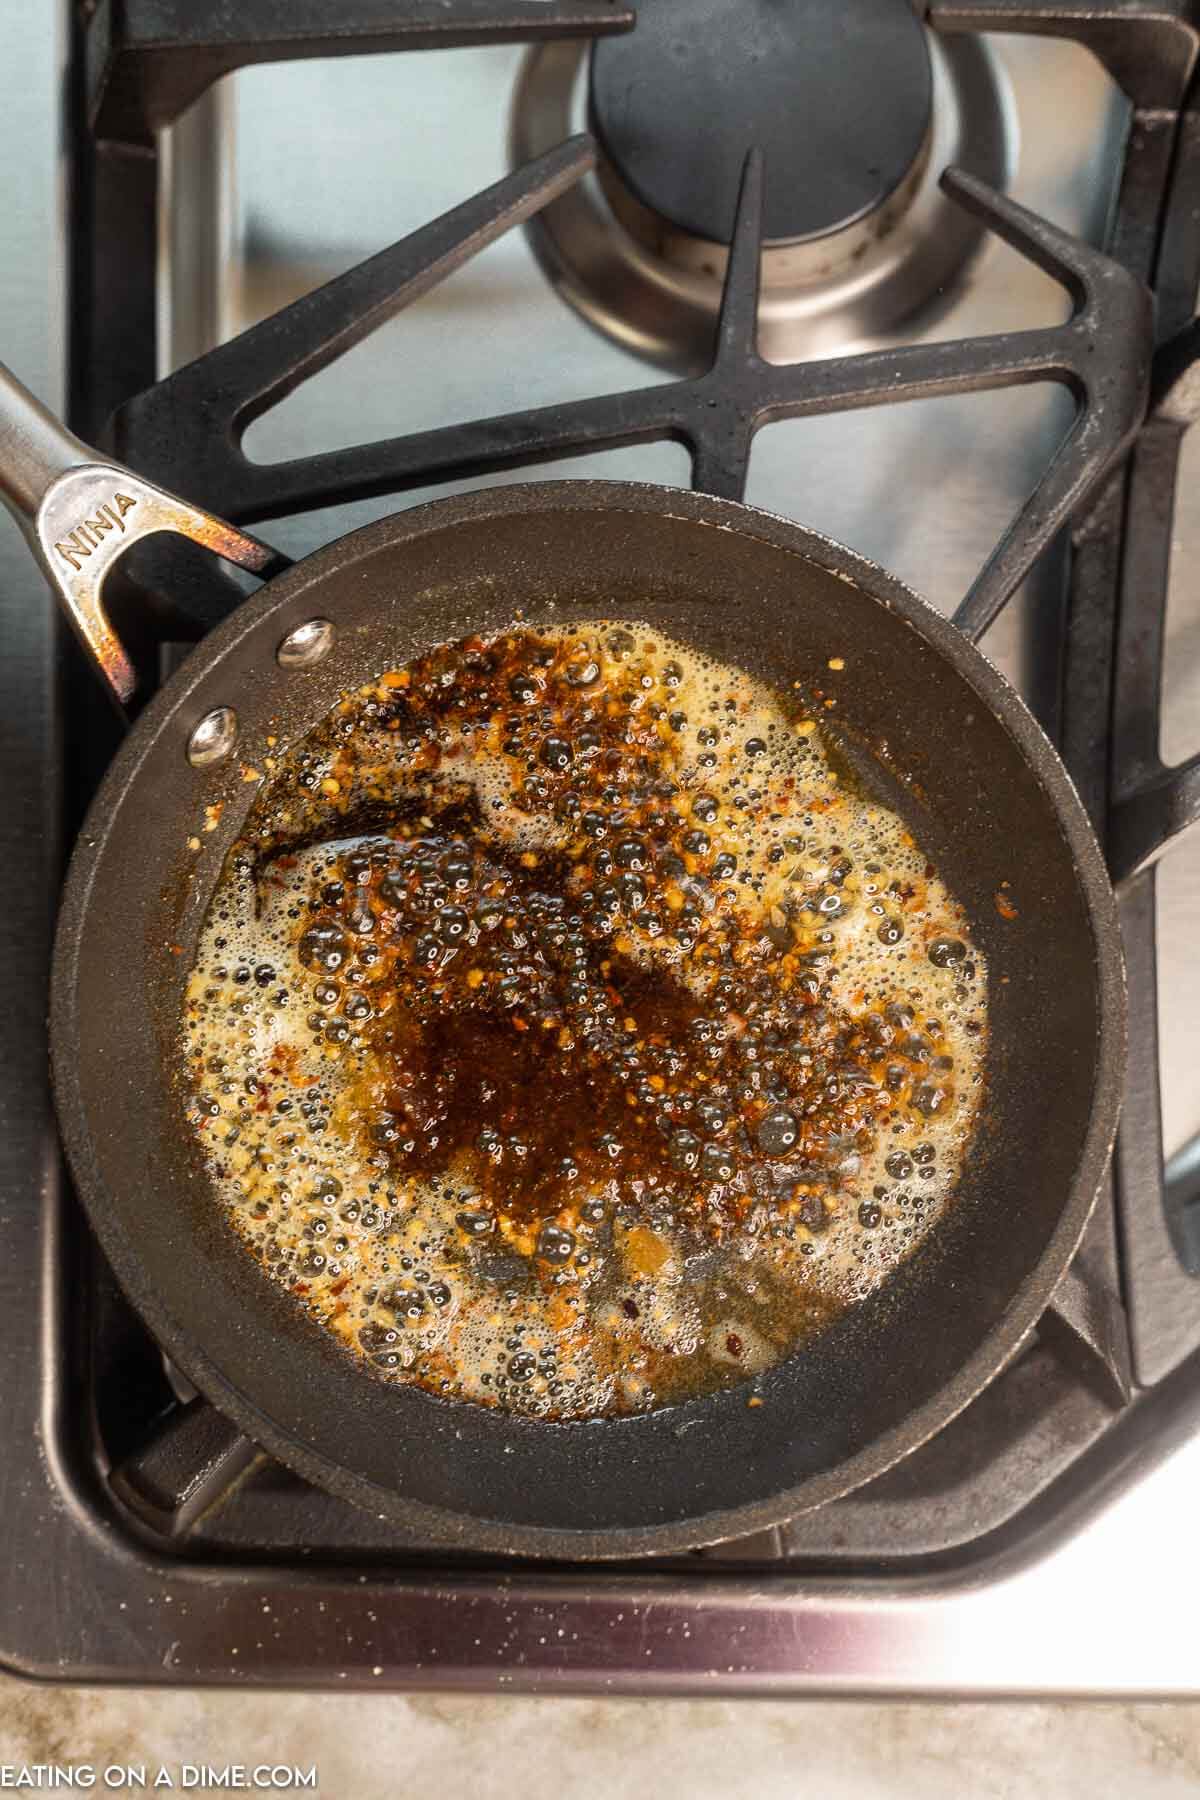 Cooking the glaze in the skillet